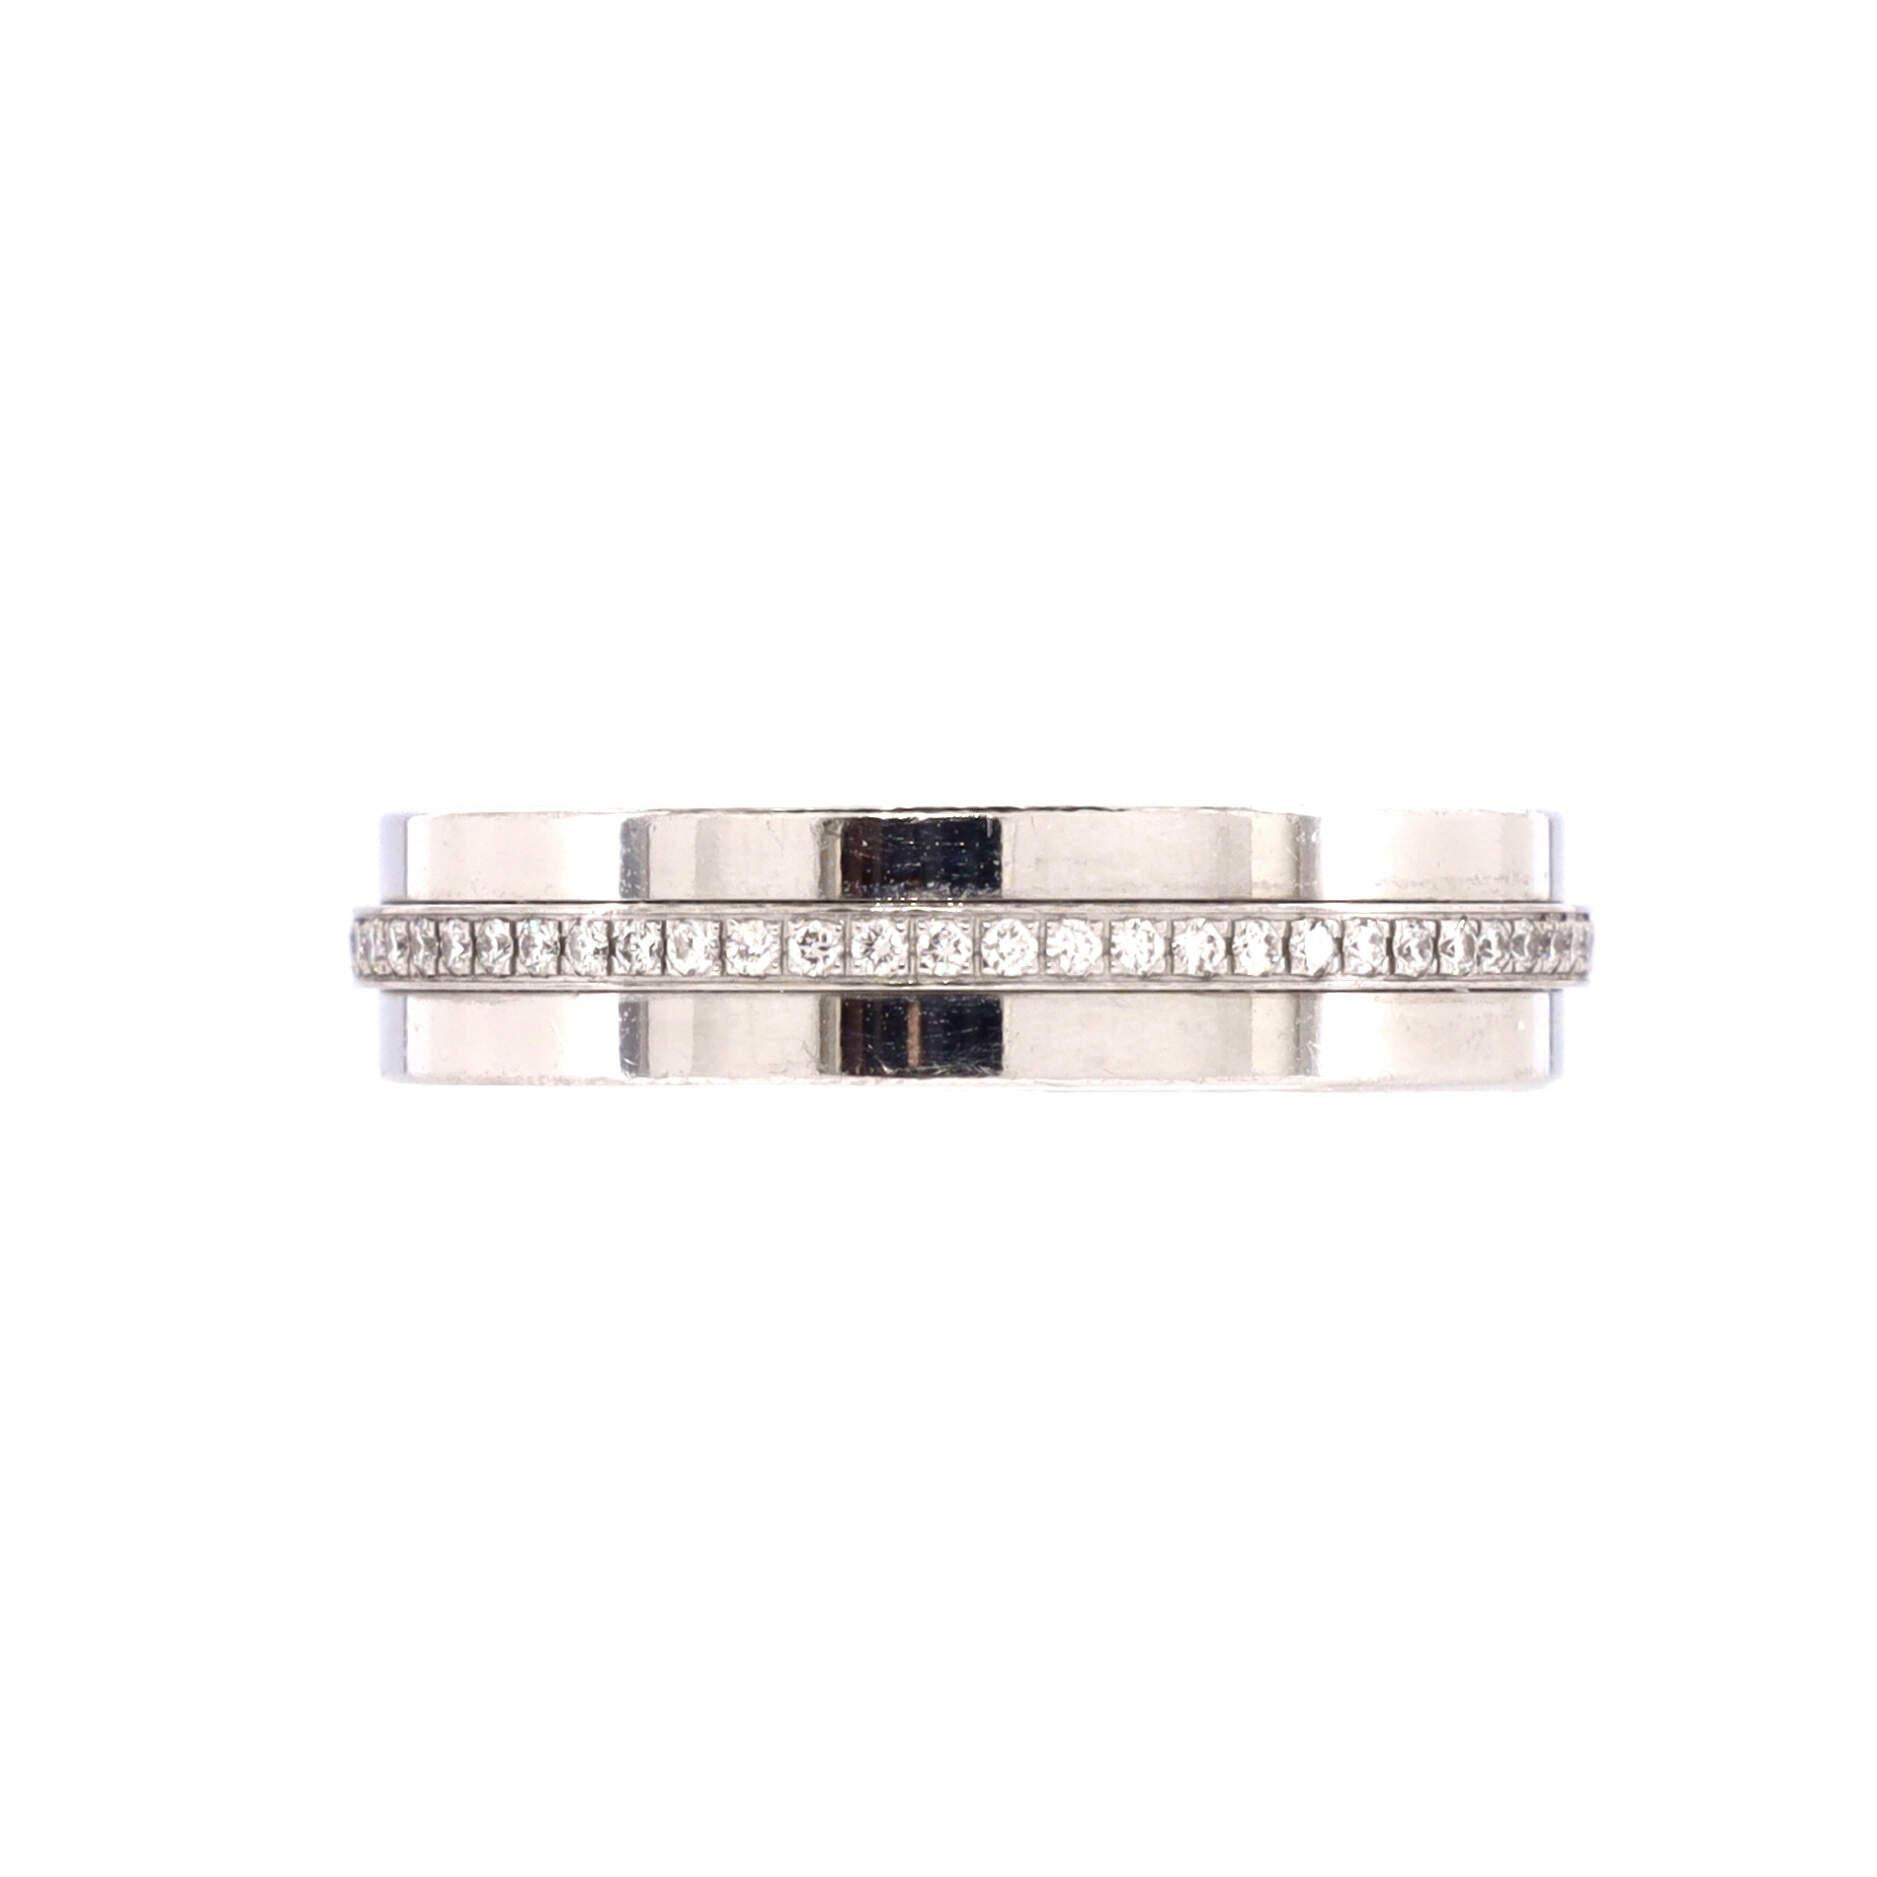 Condition: Very good. Moderate wear throughout.
Accessories: No Accessories
Measurements: Size: 5.5, Width: 4.50 mm
Designer: Tiffany & Co.
Model: Tiffany T Ring 18K White Gold and Diamonds Narrow
Exterior Color: White Gold
Item Number: 200896/5